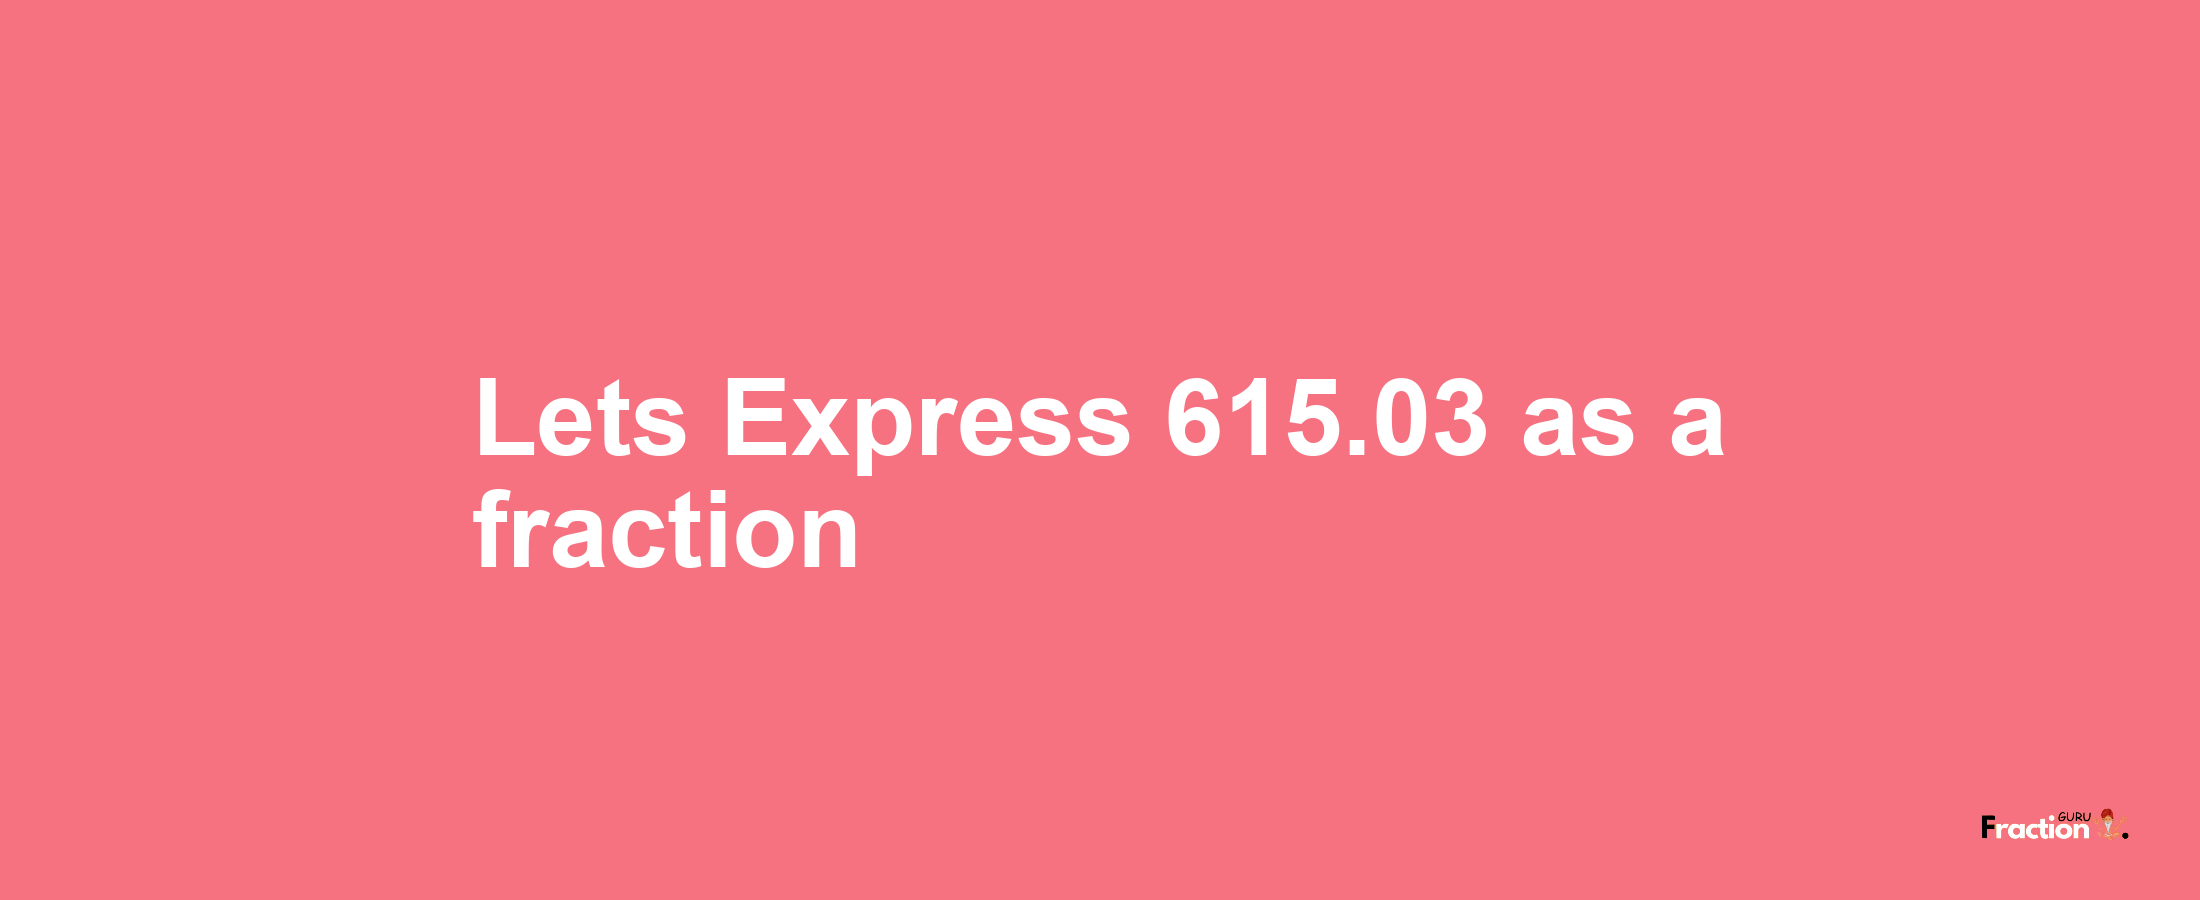 Lets Express 615.03 as afraction